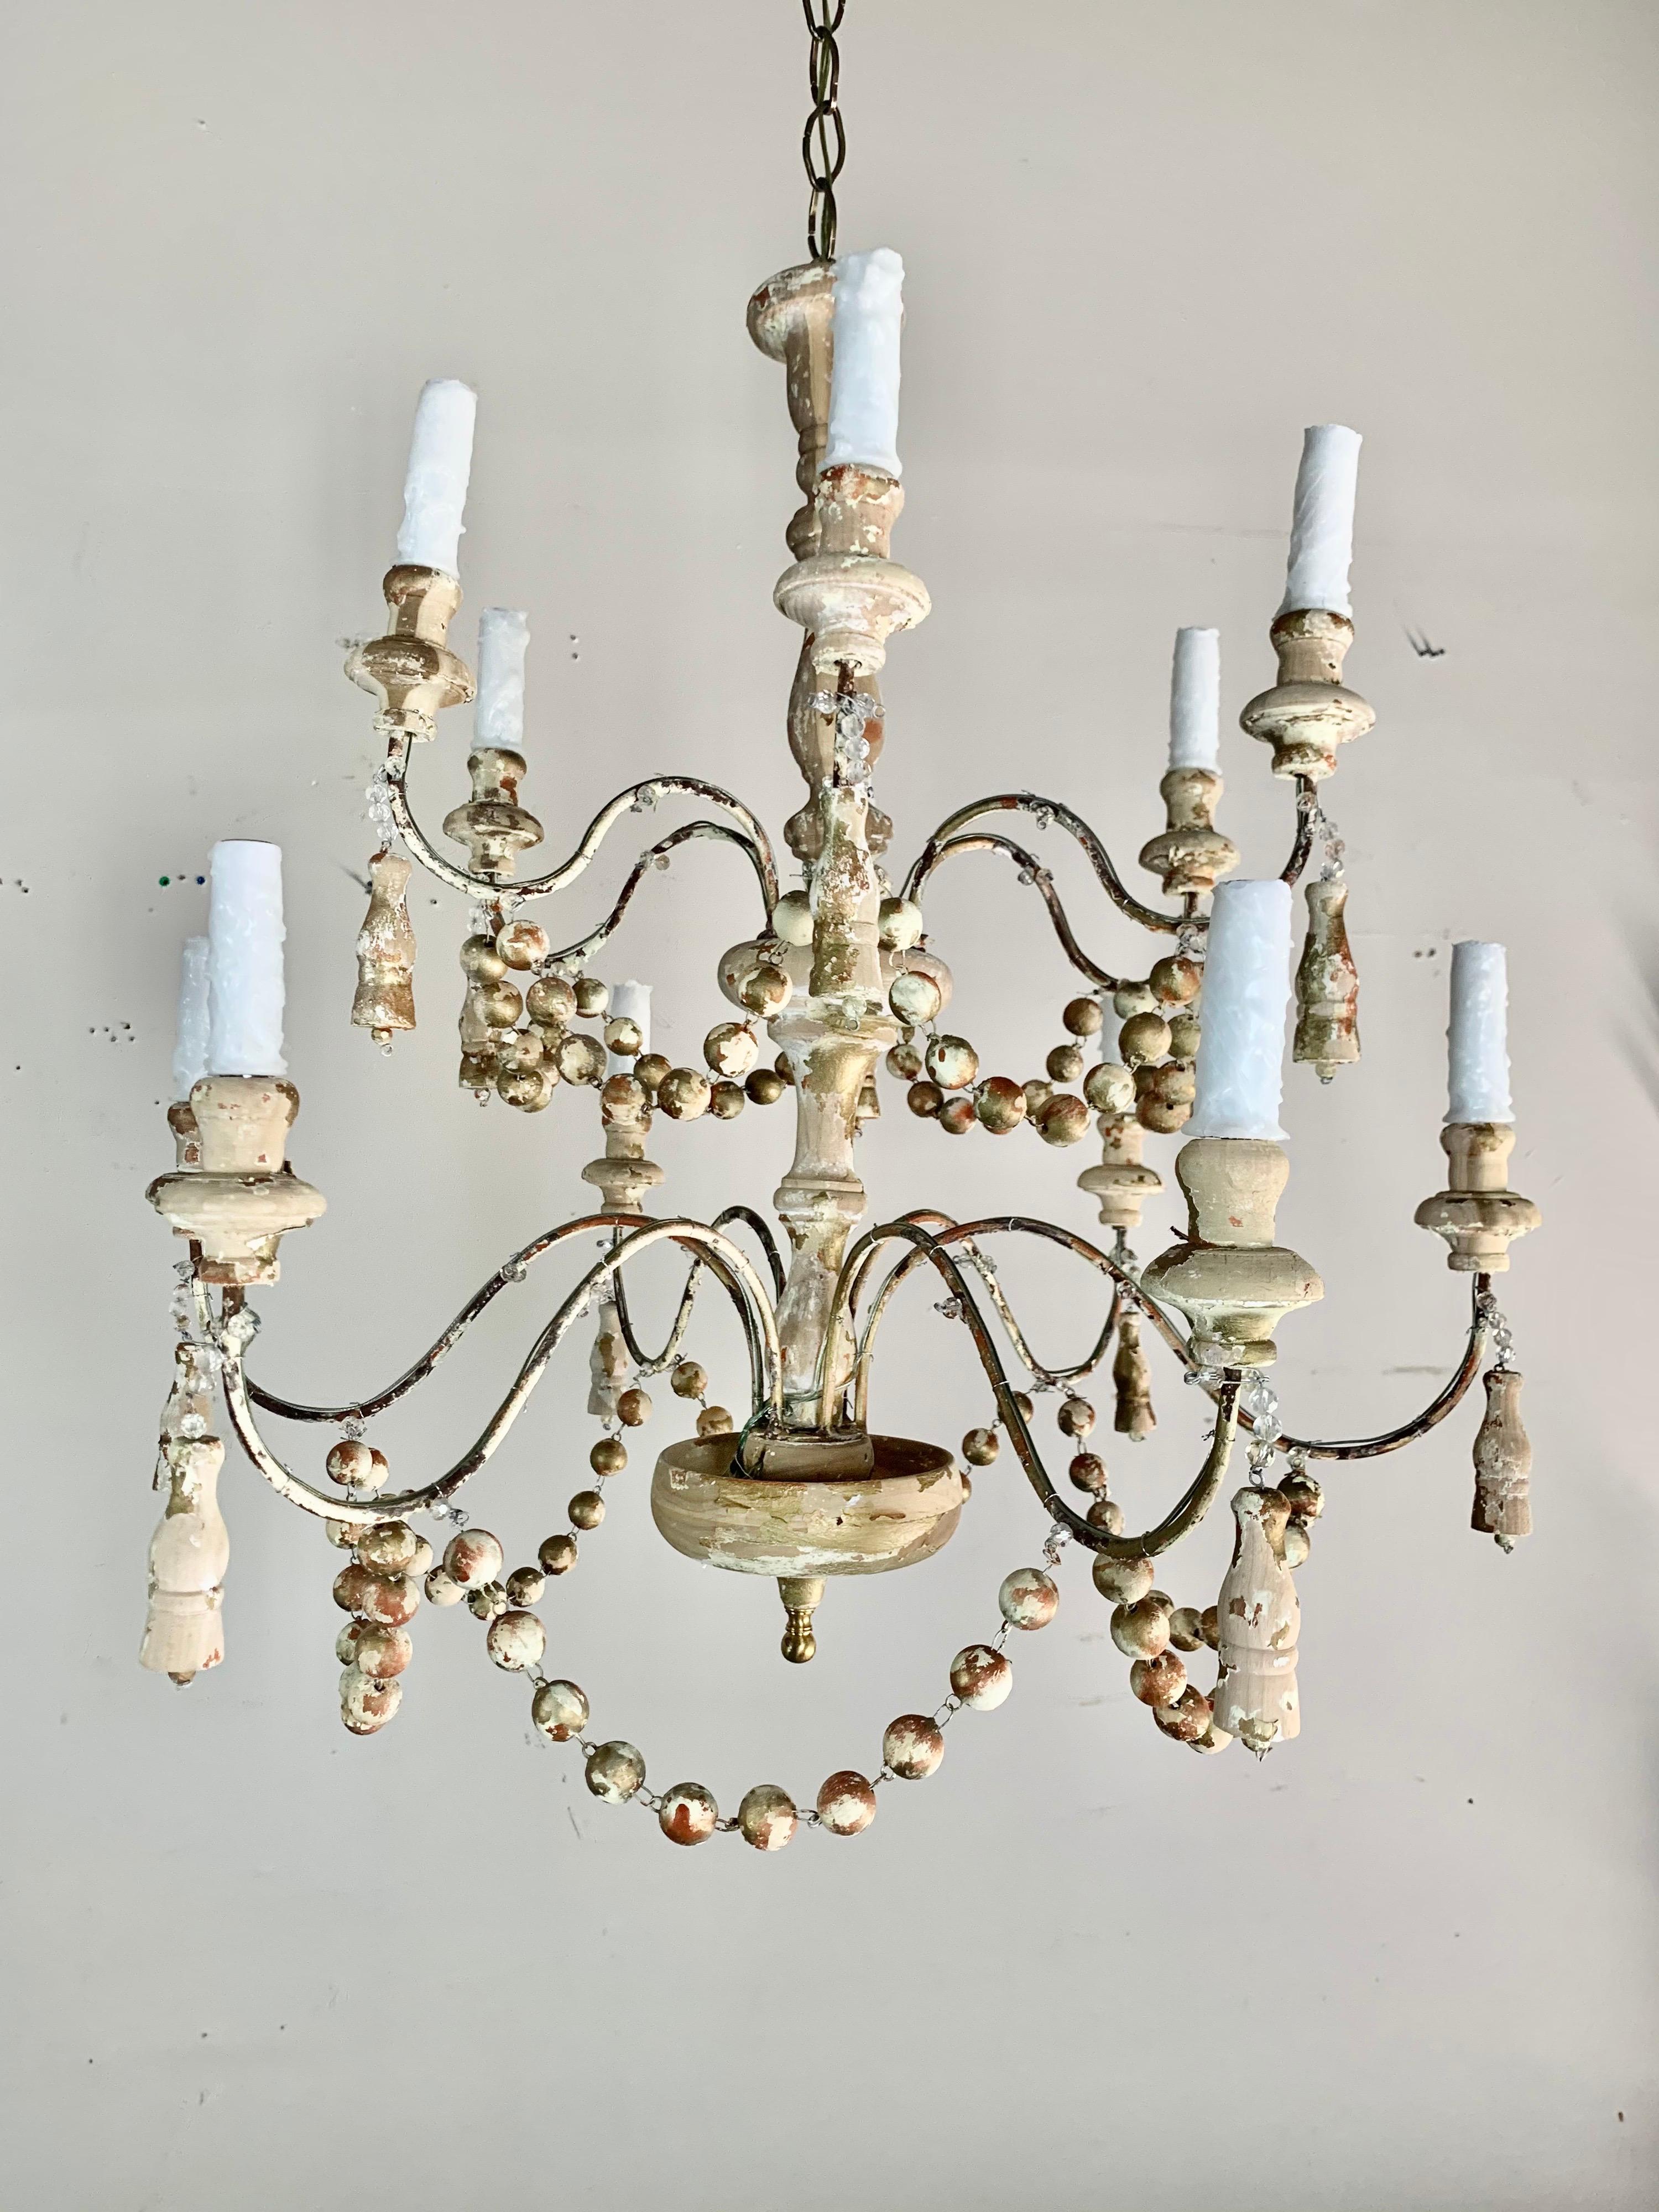 Pair of Italian painted wood beaded chandelier with garlands hanging throughout the 12 arms of the chandelier. There are hand carved tassels hanging throughout as well. The paint of the chandelier is beautifully distressed with some natural wood